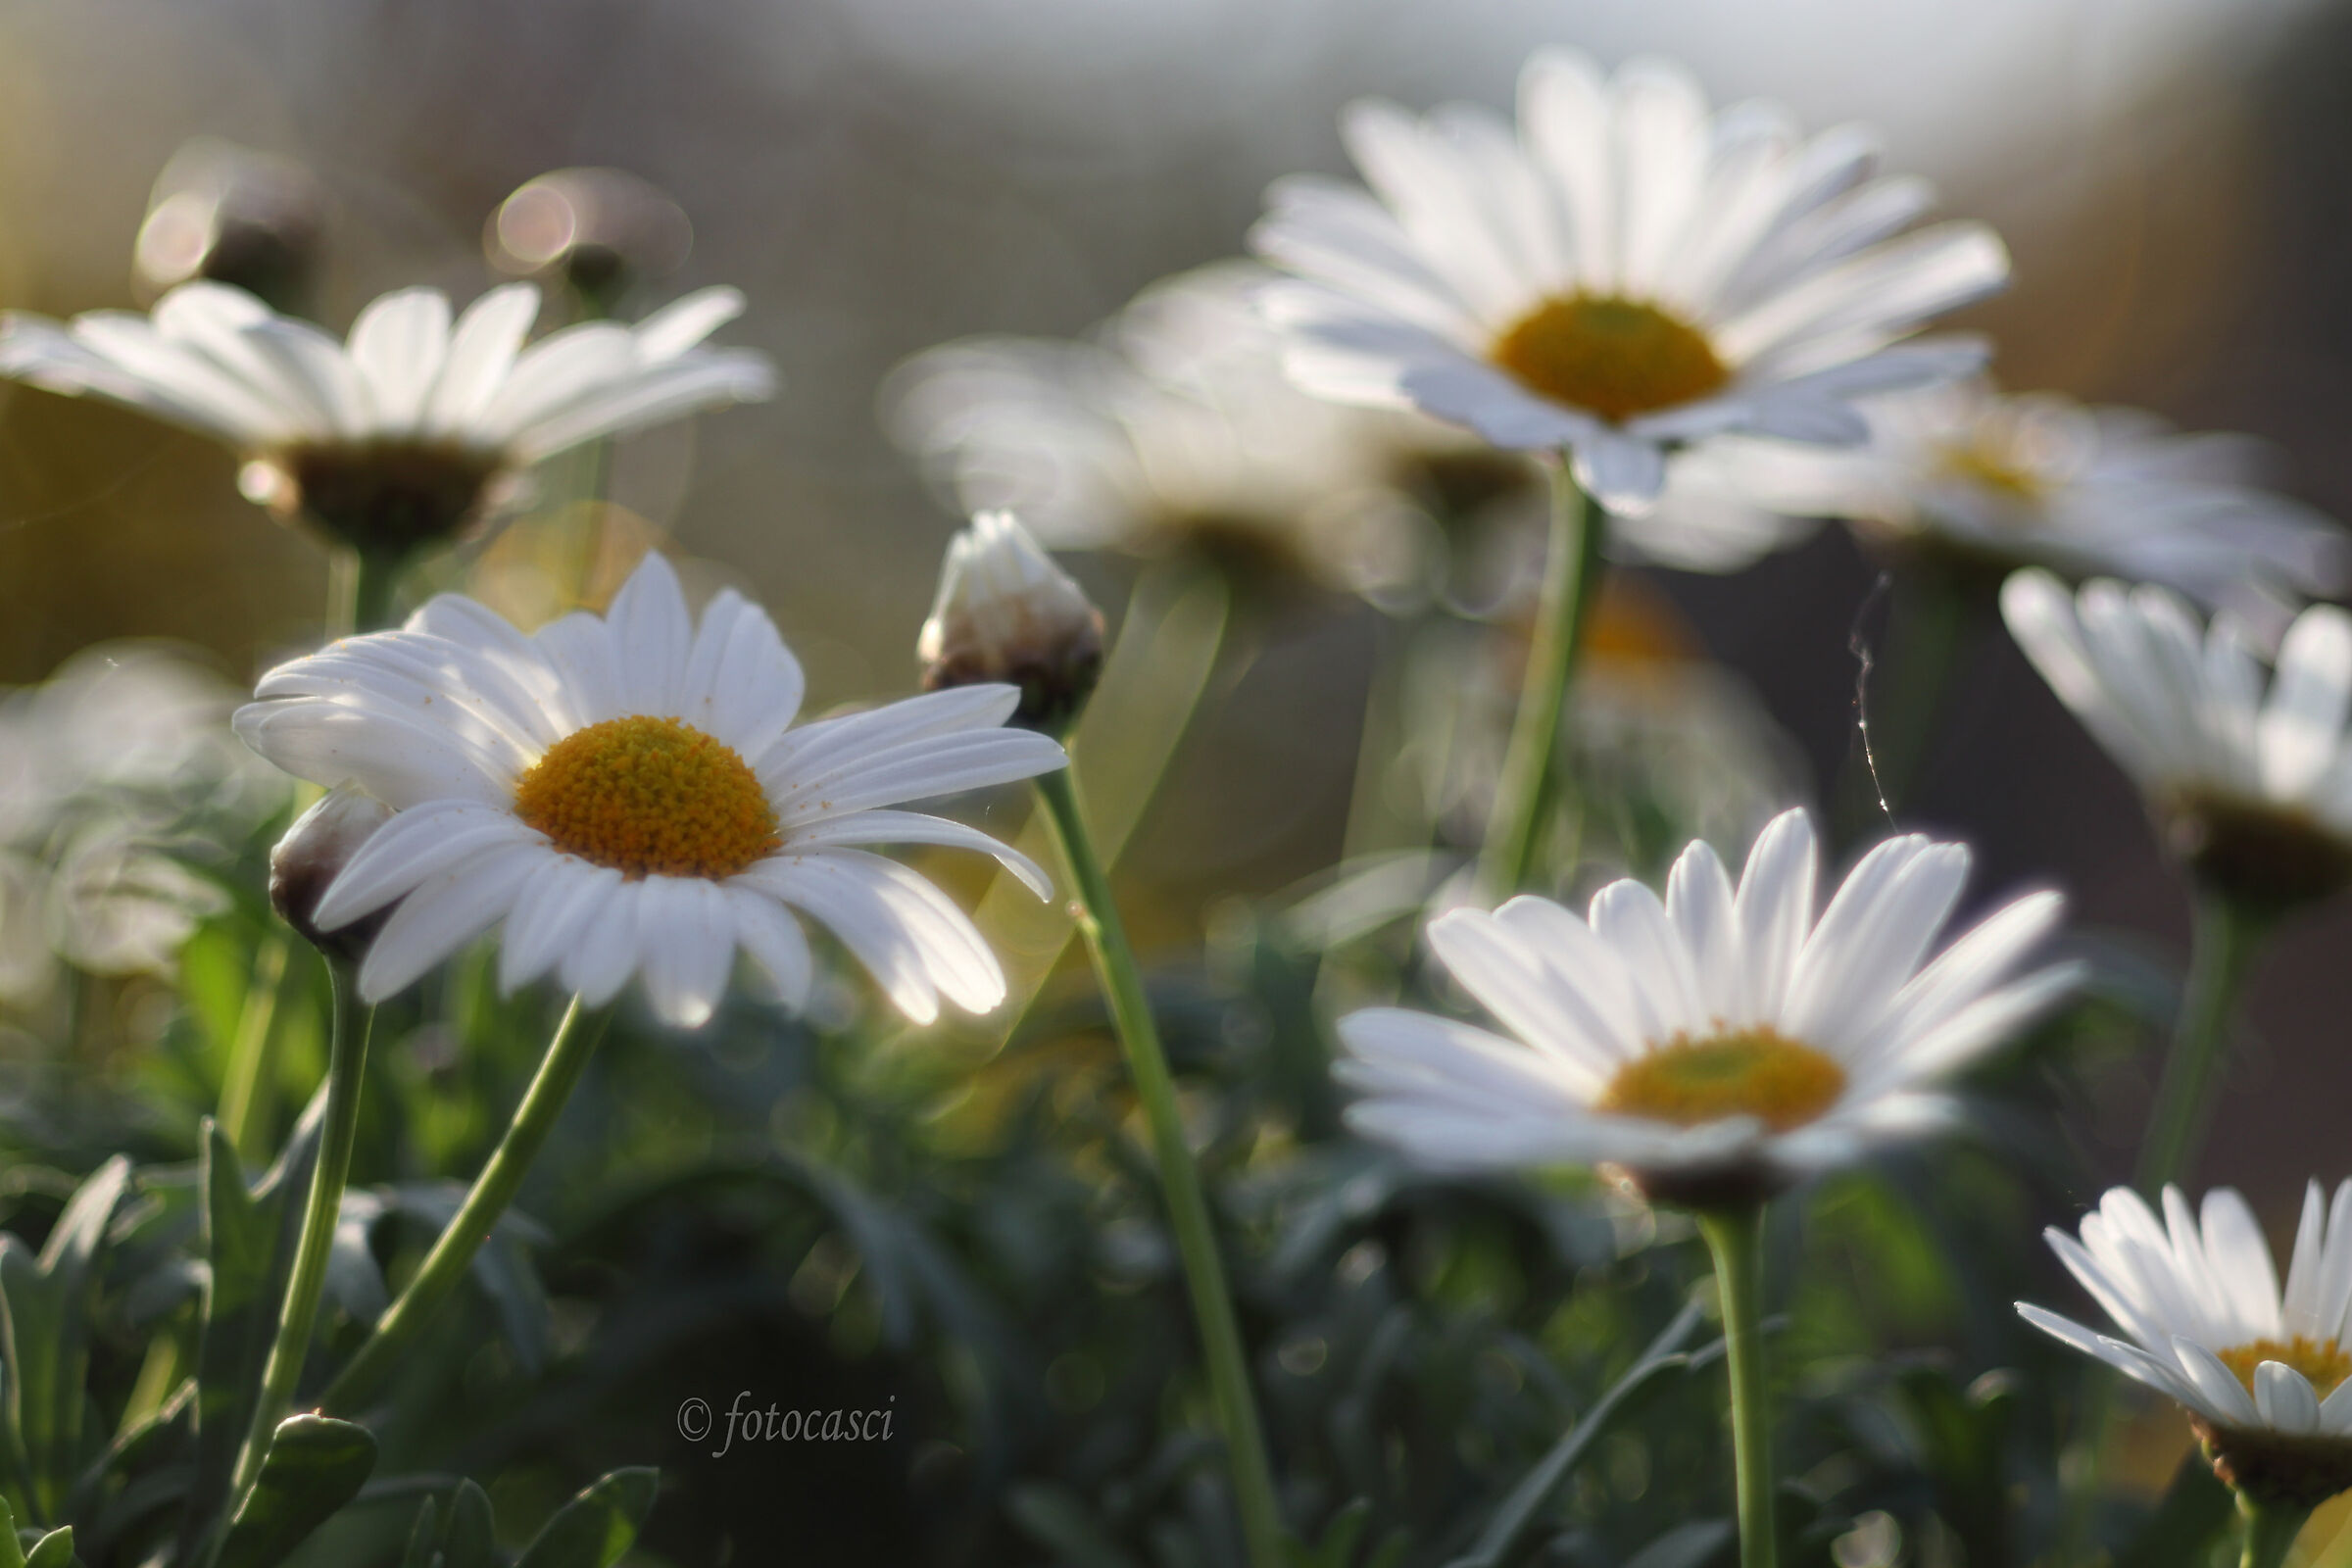 daisies with bubbles:)...